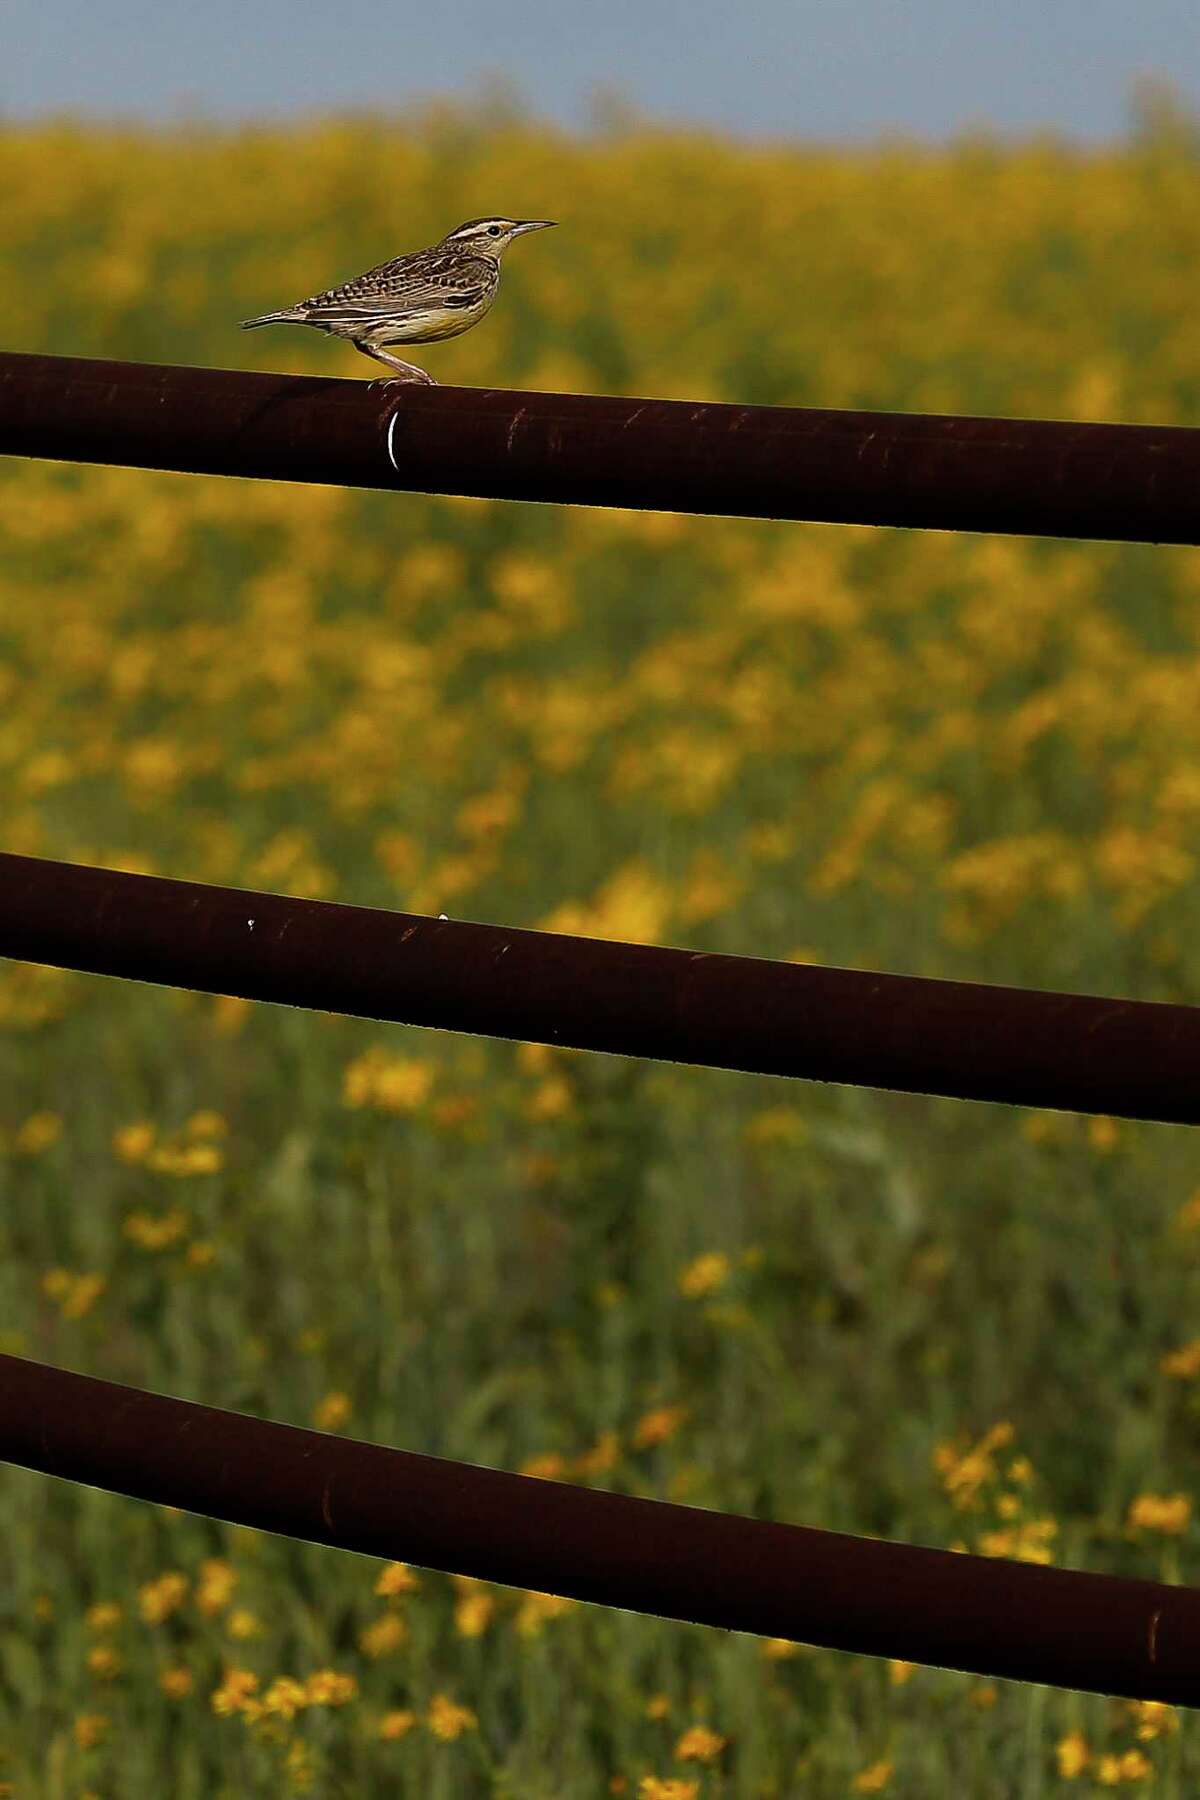 A bird sits on a fence next to a field of flowers Friday, March 23, 2018 near Brenham.